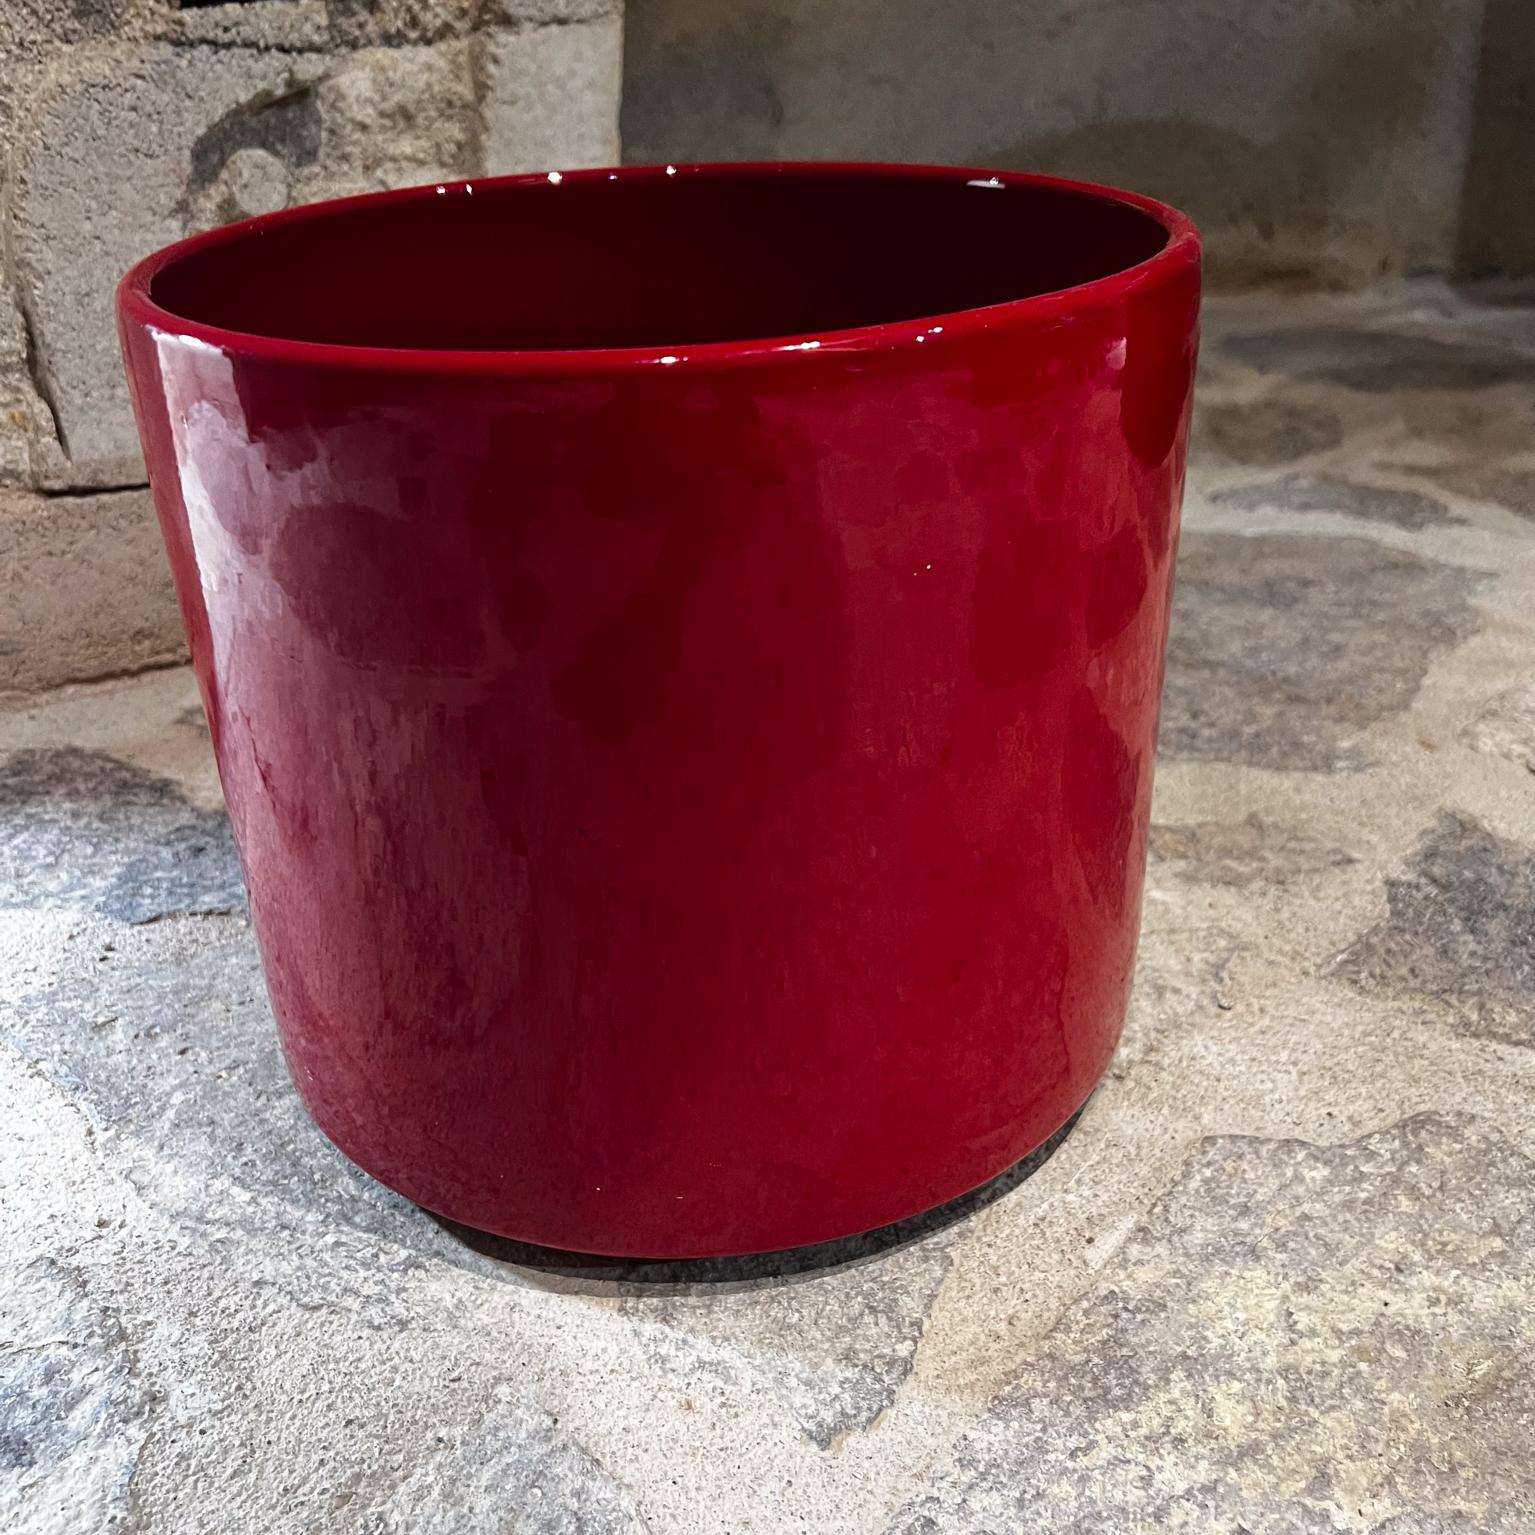 1960s Fabulous red Gainey Modern planter Architectural pottery California
Measures: 10 diameter x 9 tall
Maker stamped Gainey Ceramics La Verne Ca
Original preowned unrestored vintage condition
See images provided.
  